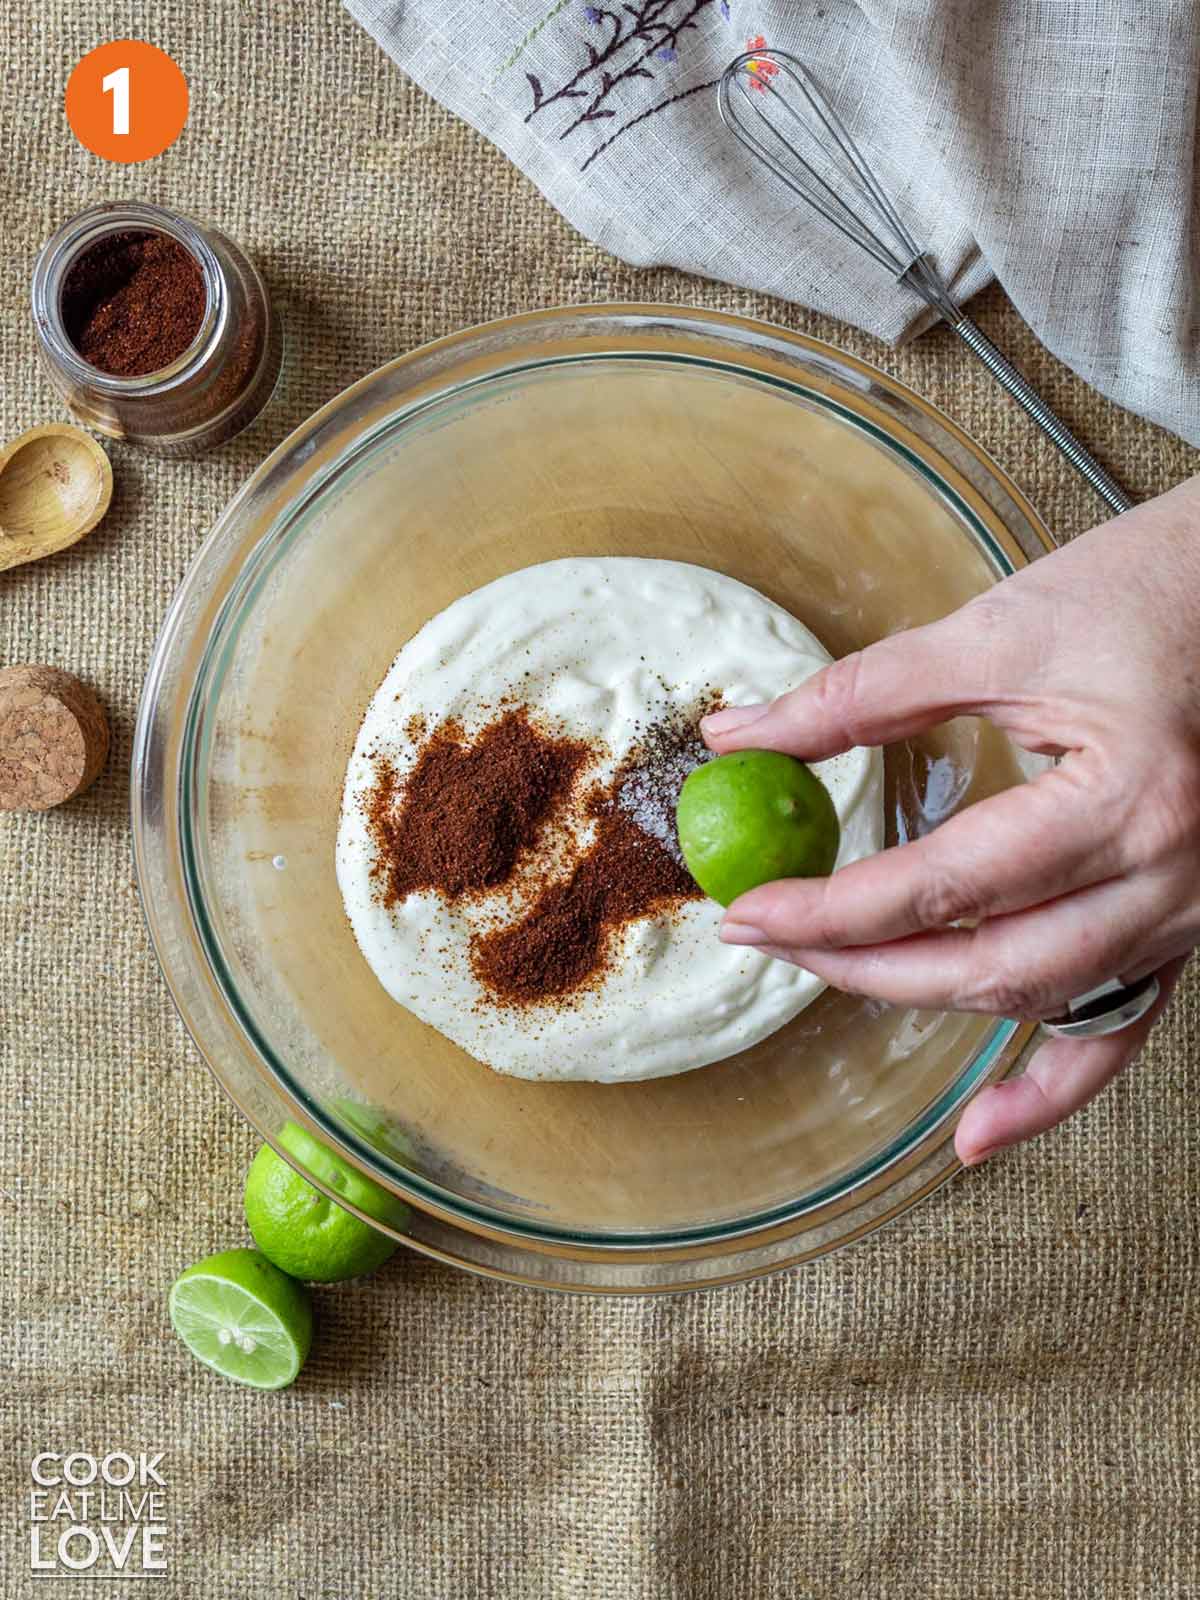 A hand squeezing a lime into the other chipotle sauce ingredients.